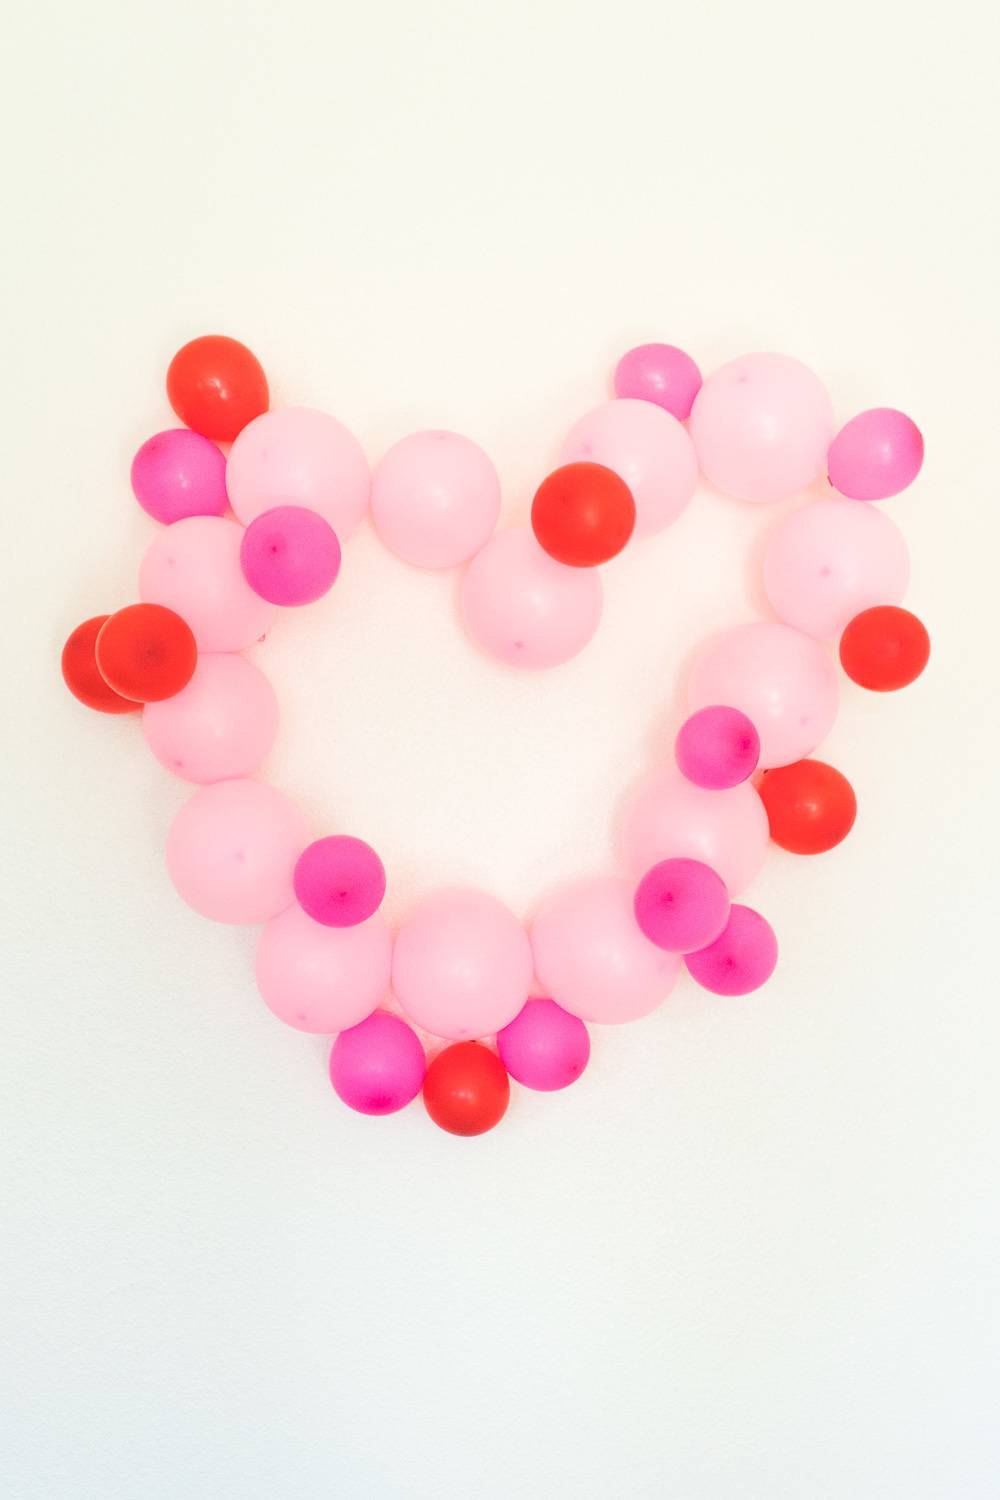 A heart made of different colors of pink balloons.